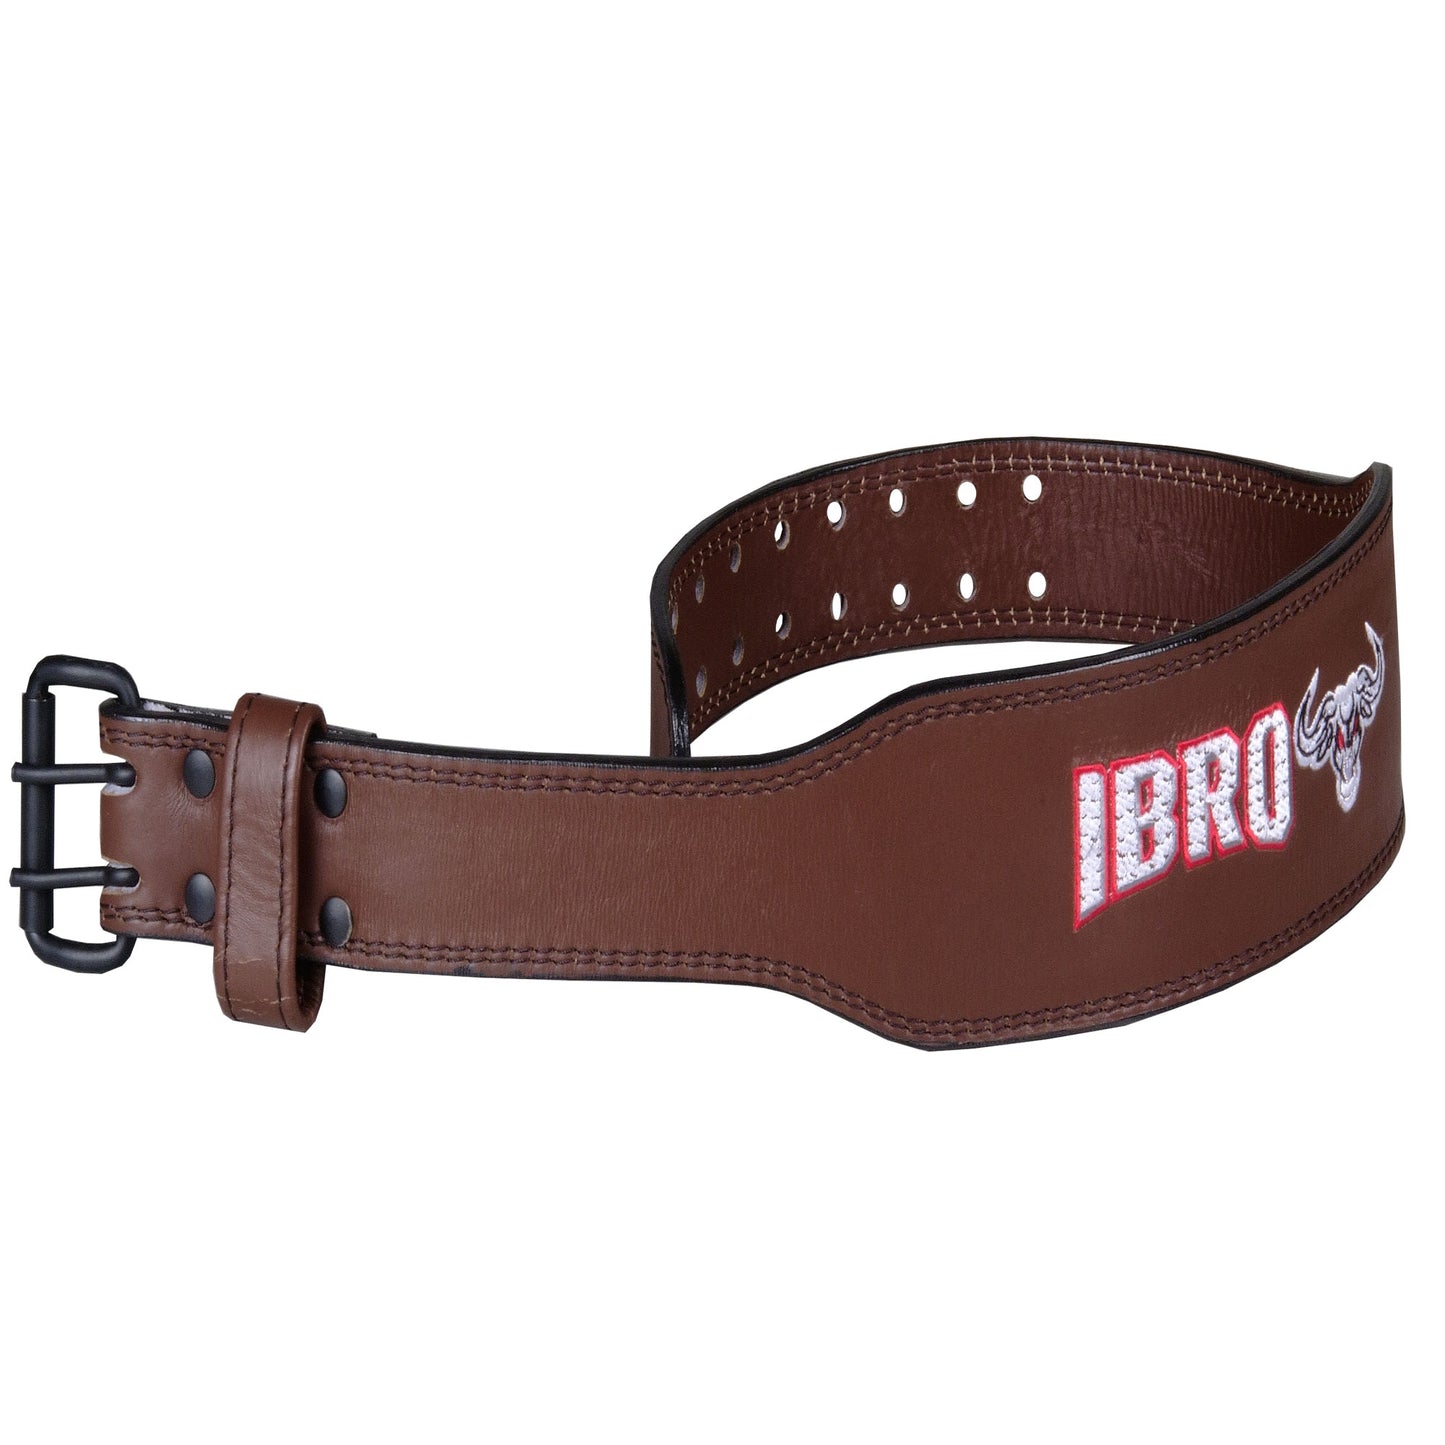 IBRO Premium Aniline 7MM Leather Weight Lifting Belt for Men Squats Deadlift Strength Training Bodybuilding Heavy Duty Steel Roller Buckle Comfortable Weightlifting Padded Lower Back Support Brown